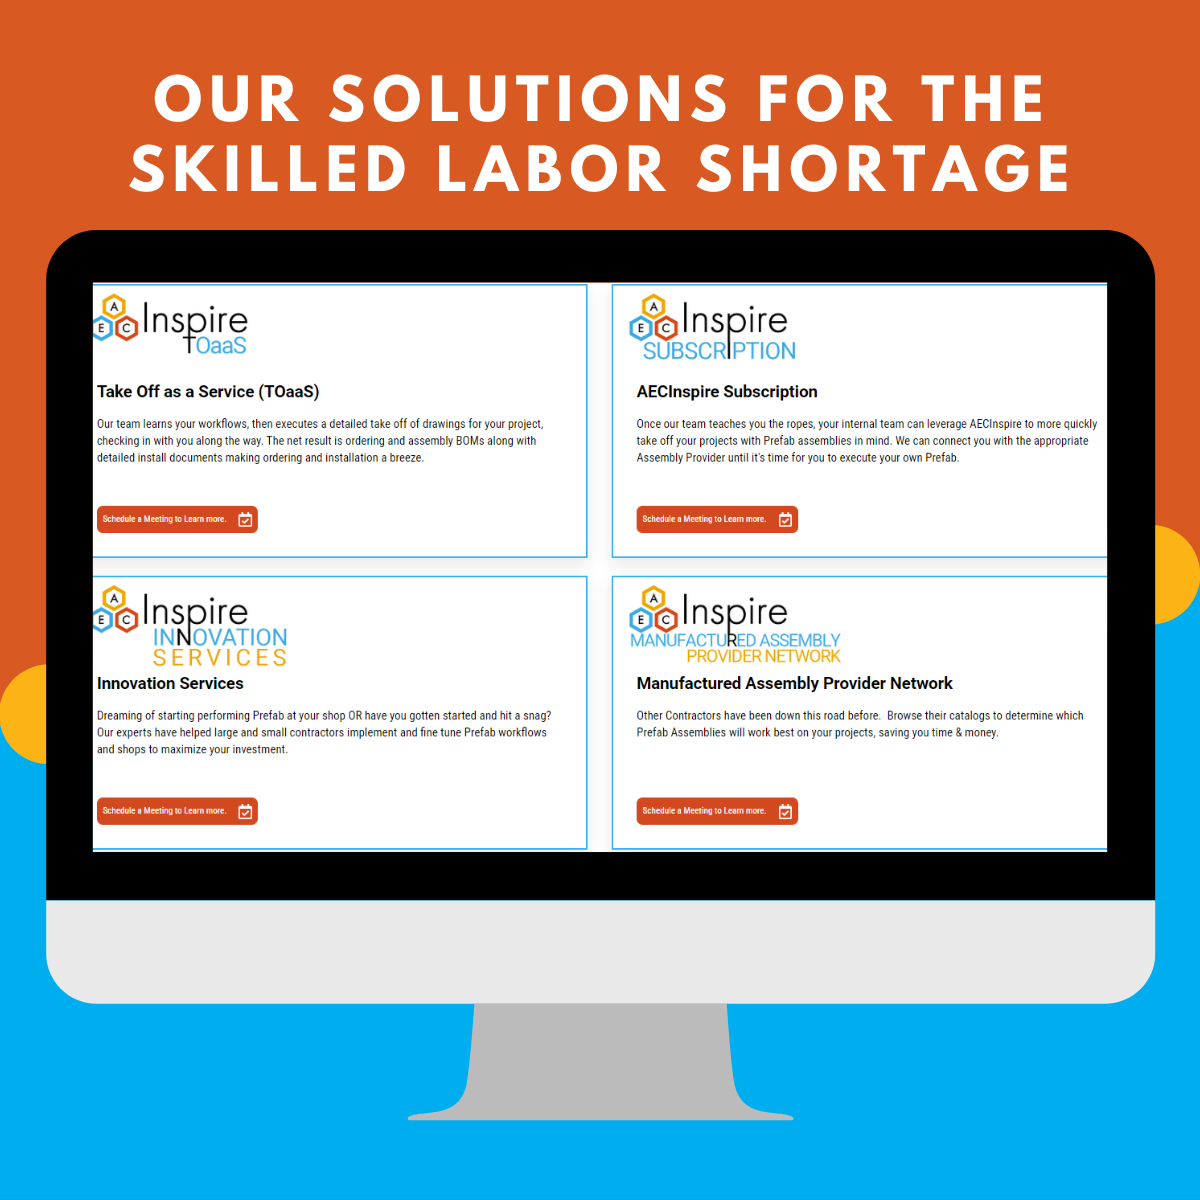 SOLUTIONS FOR THE SKILLED LABOR SHORTAGE